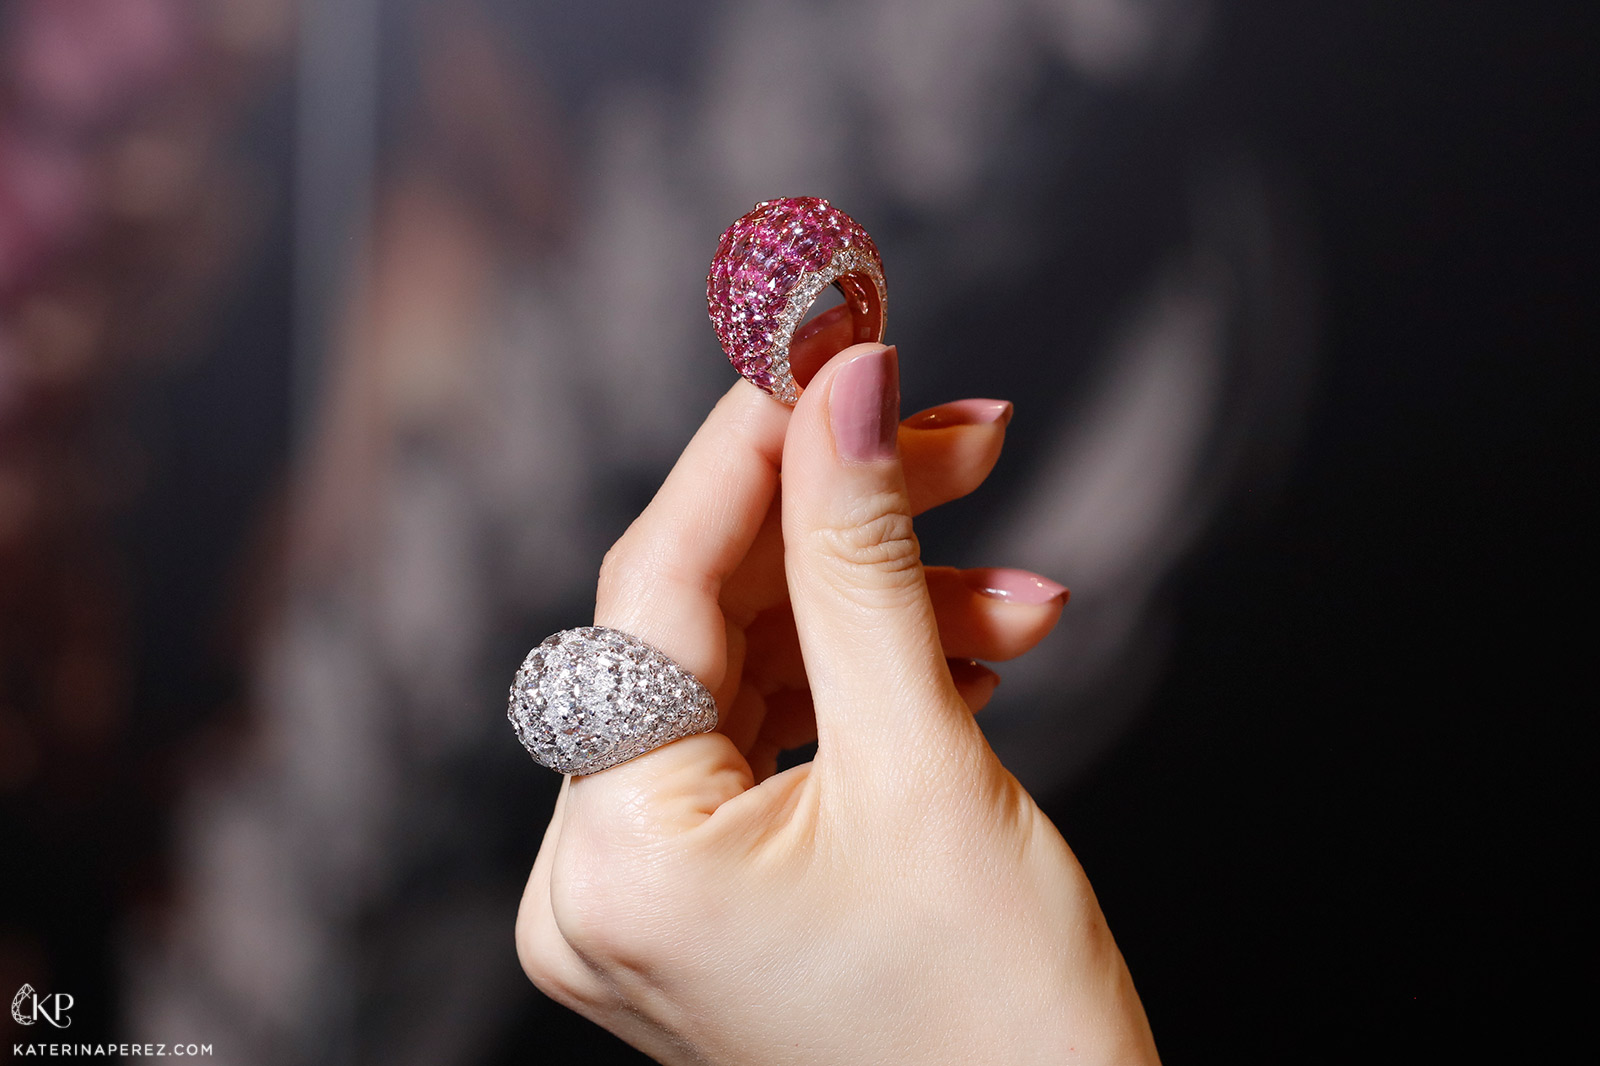 Baenteli Sphere rings with pink sapphires and diamonds